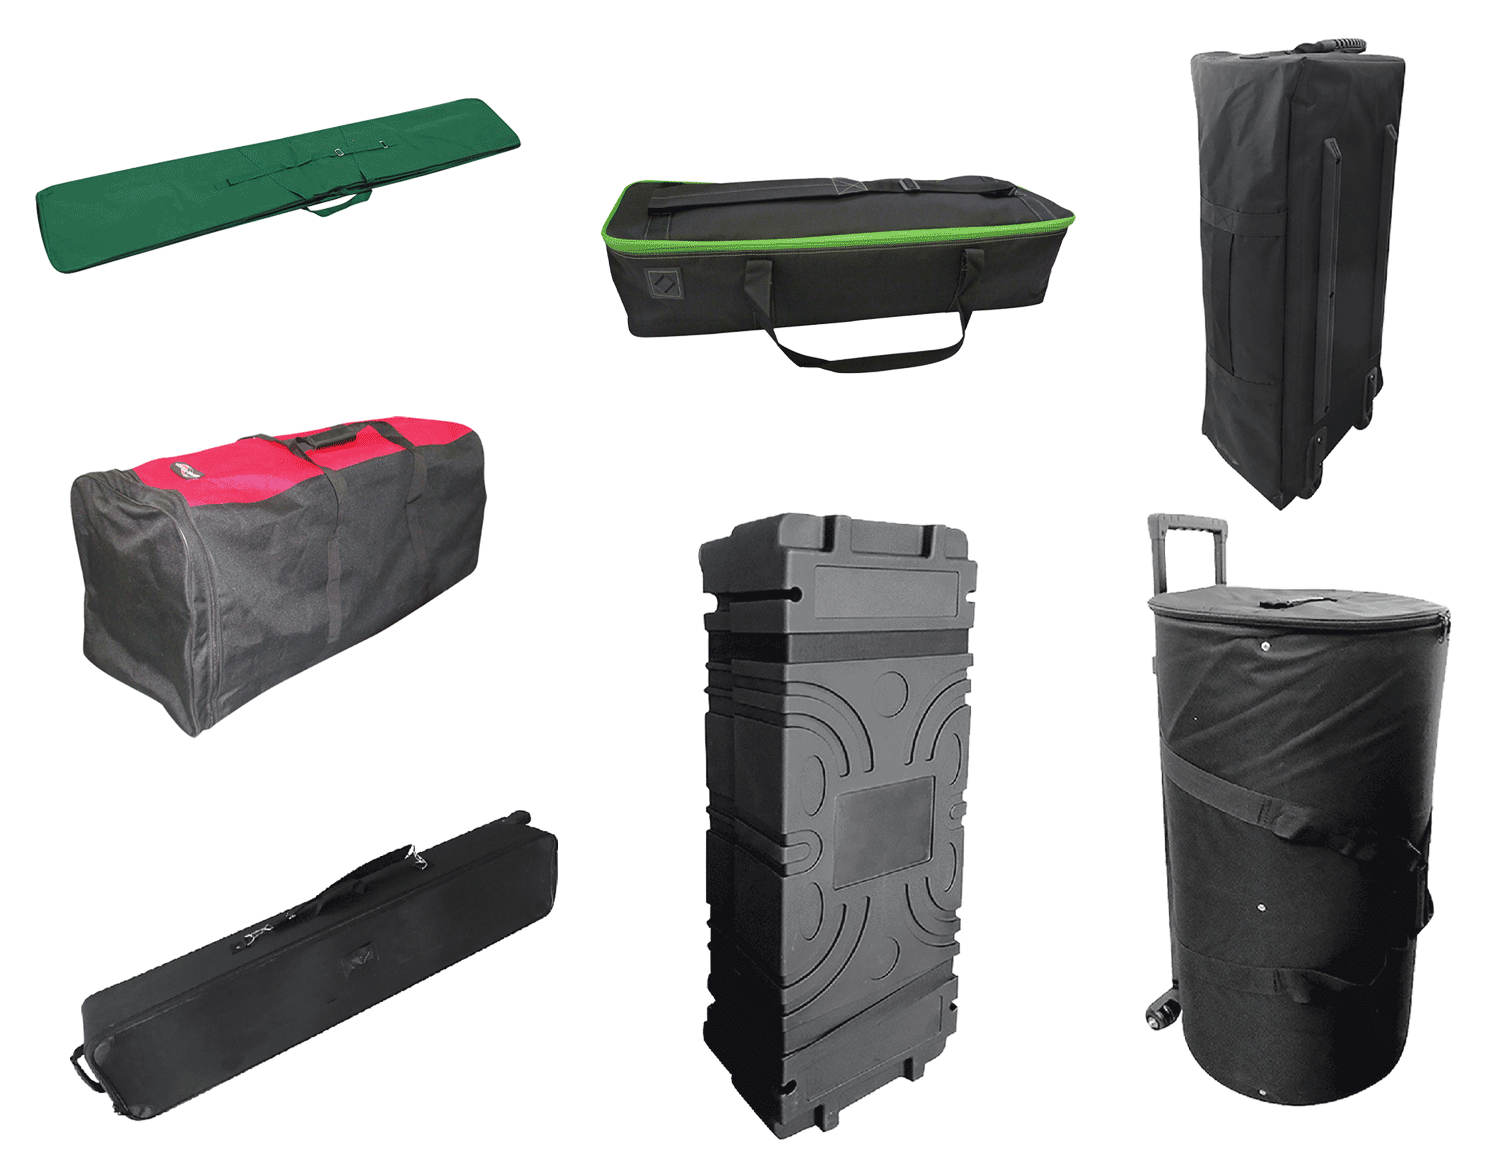 Cases and carry bags